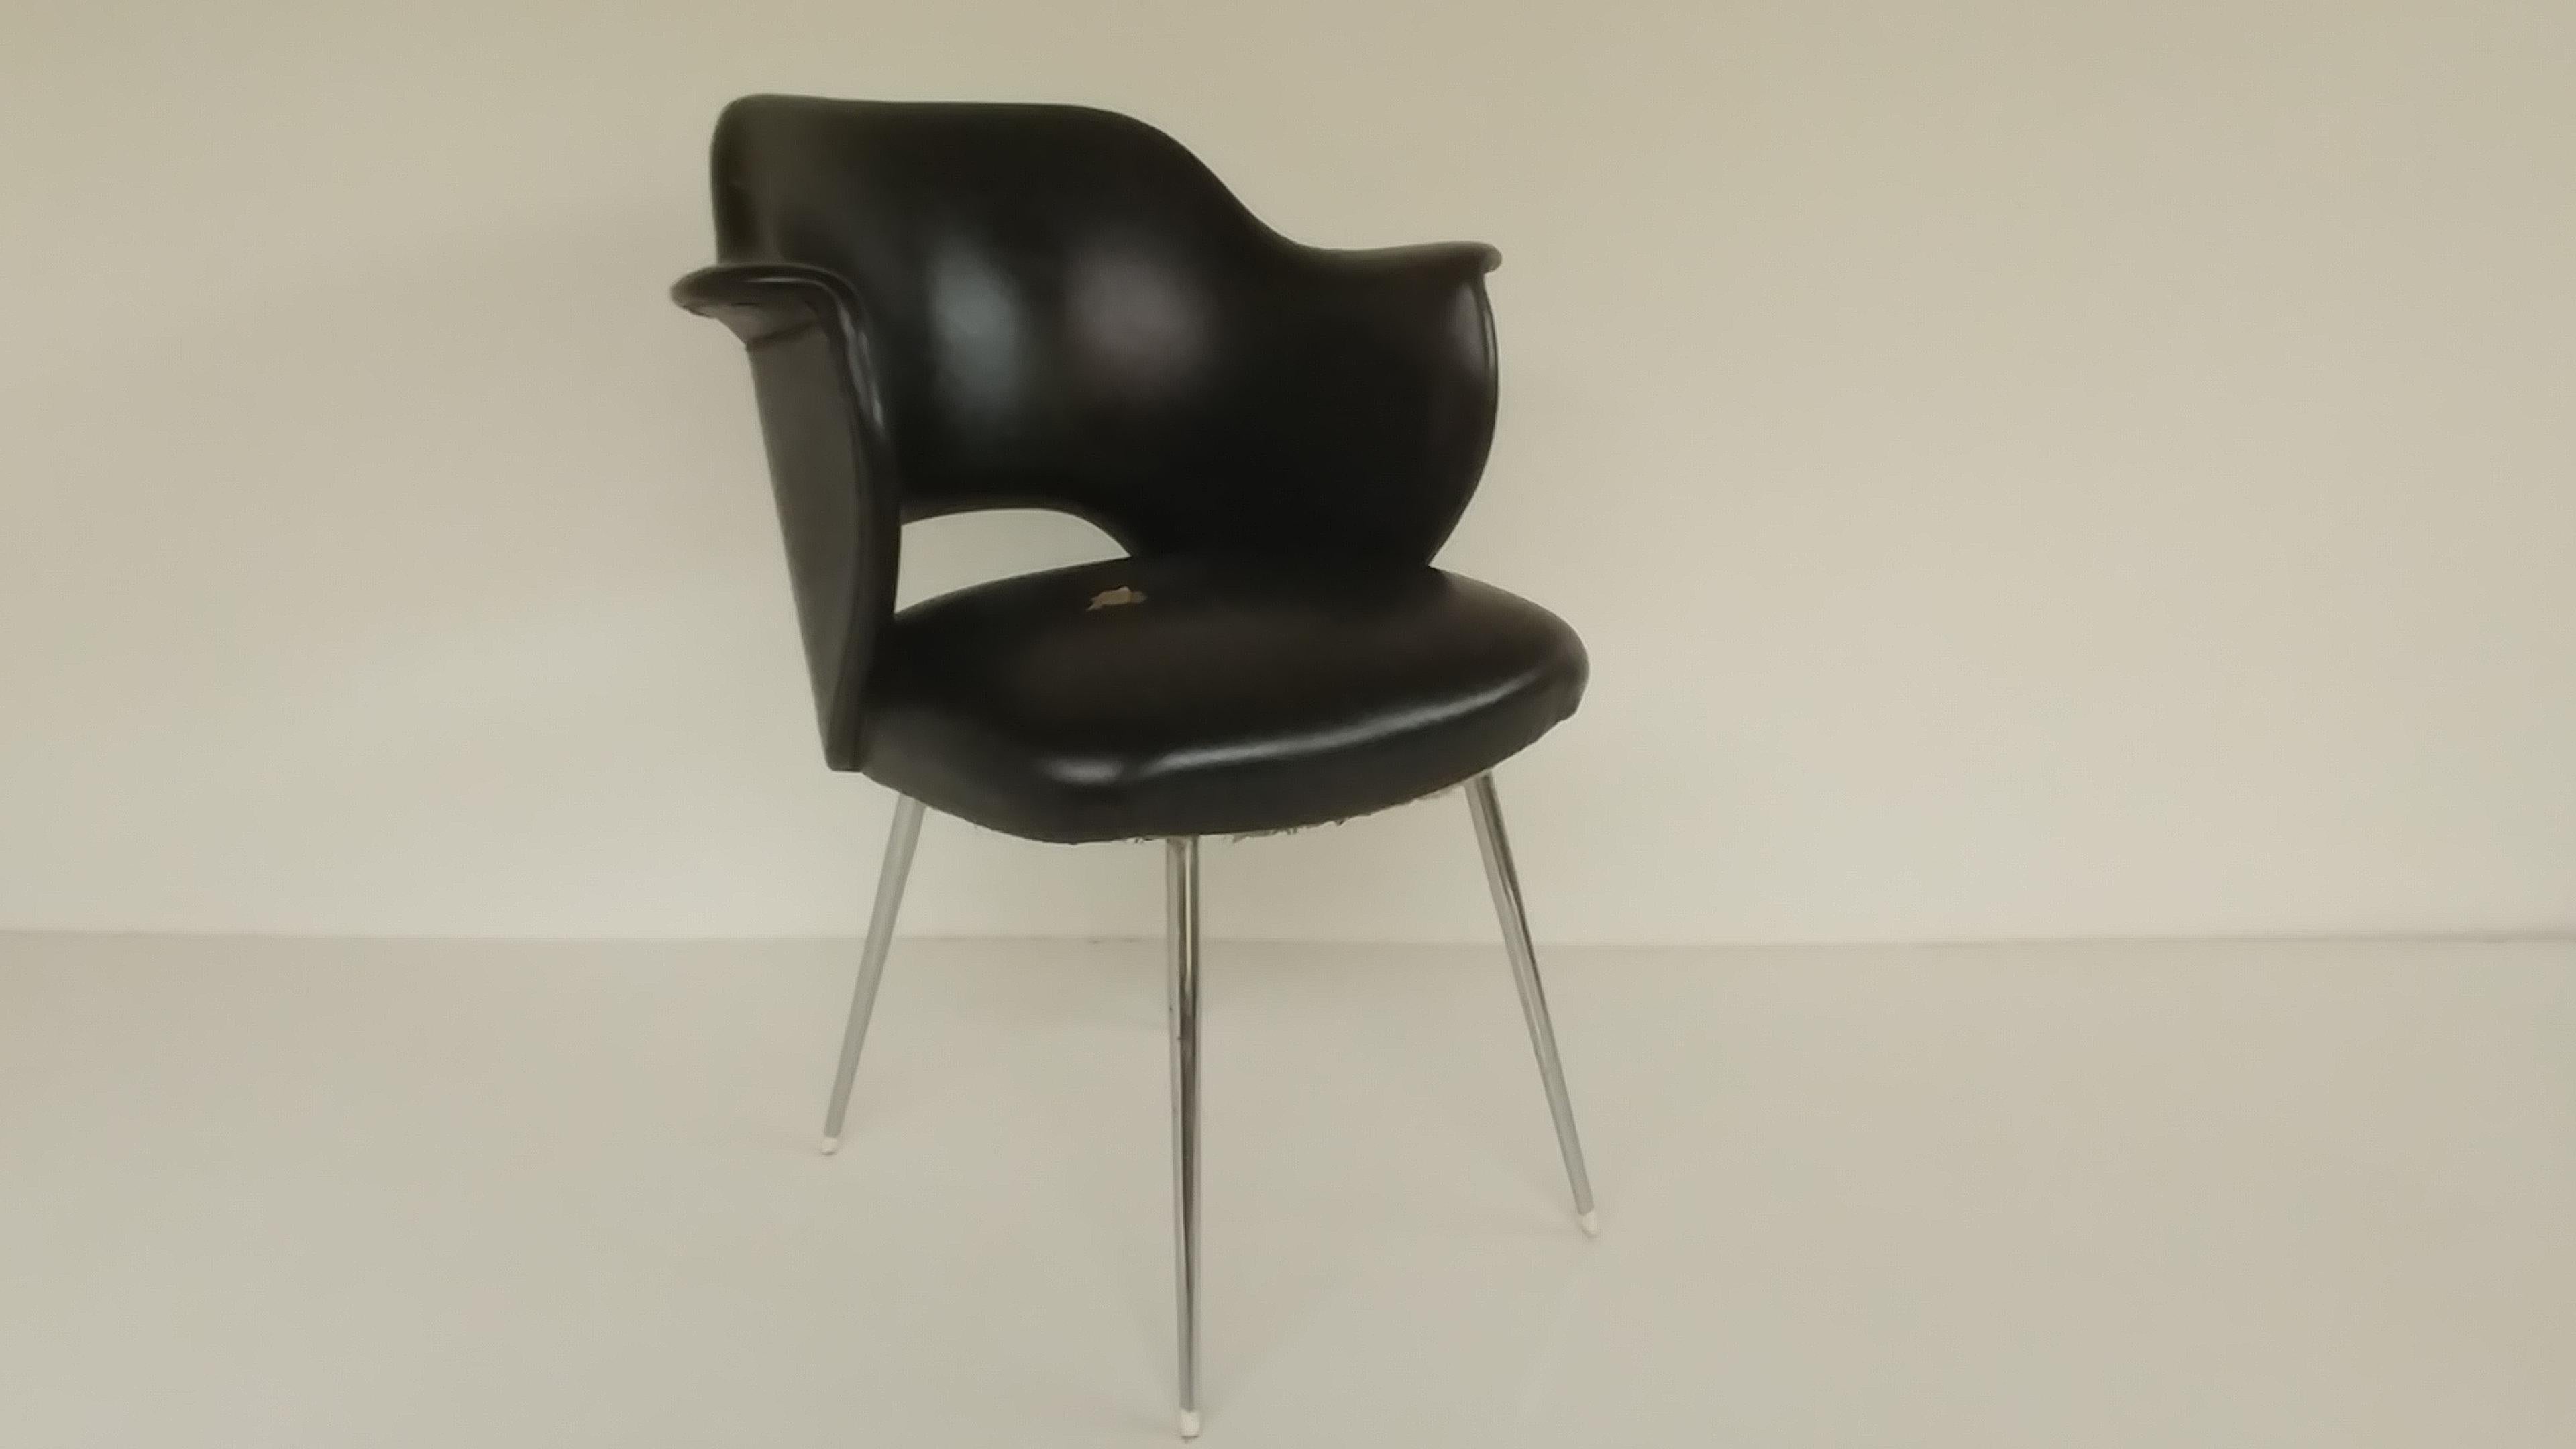 Bruxelles armchair from 1960, Czech Republic.

Highly recommended item will be perfect complementation of the rooms in not only Classic style, but also Art Deco and modern.

The second seat at the twin auction.
 